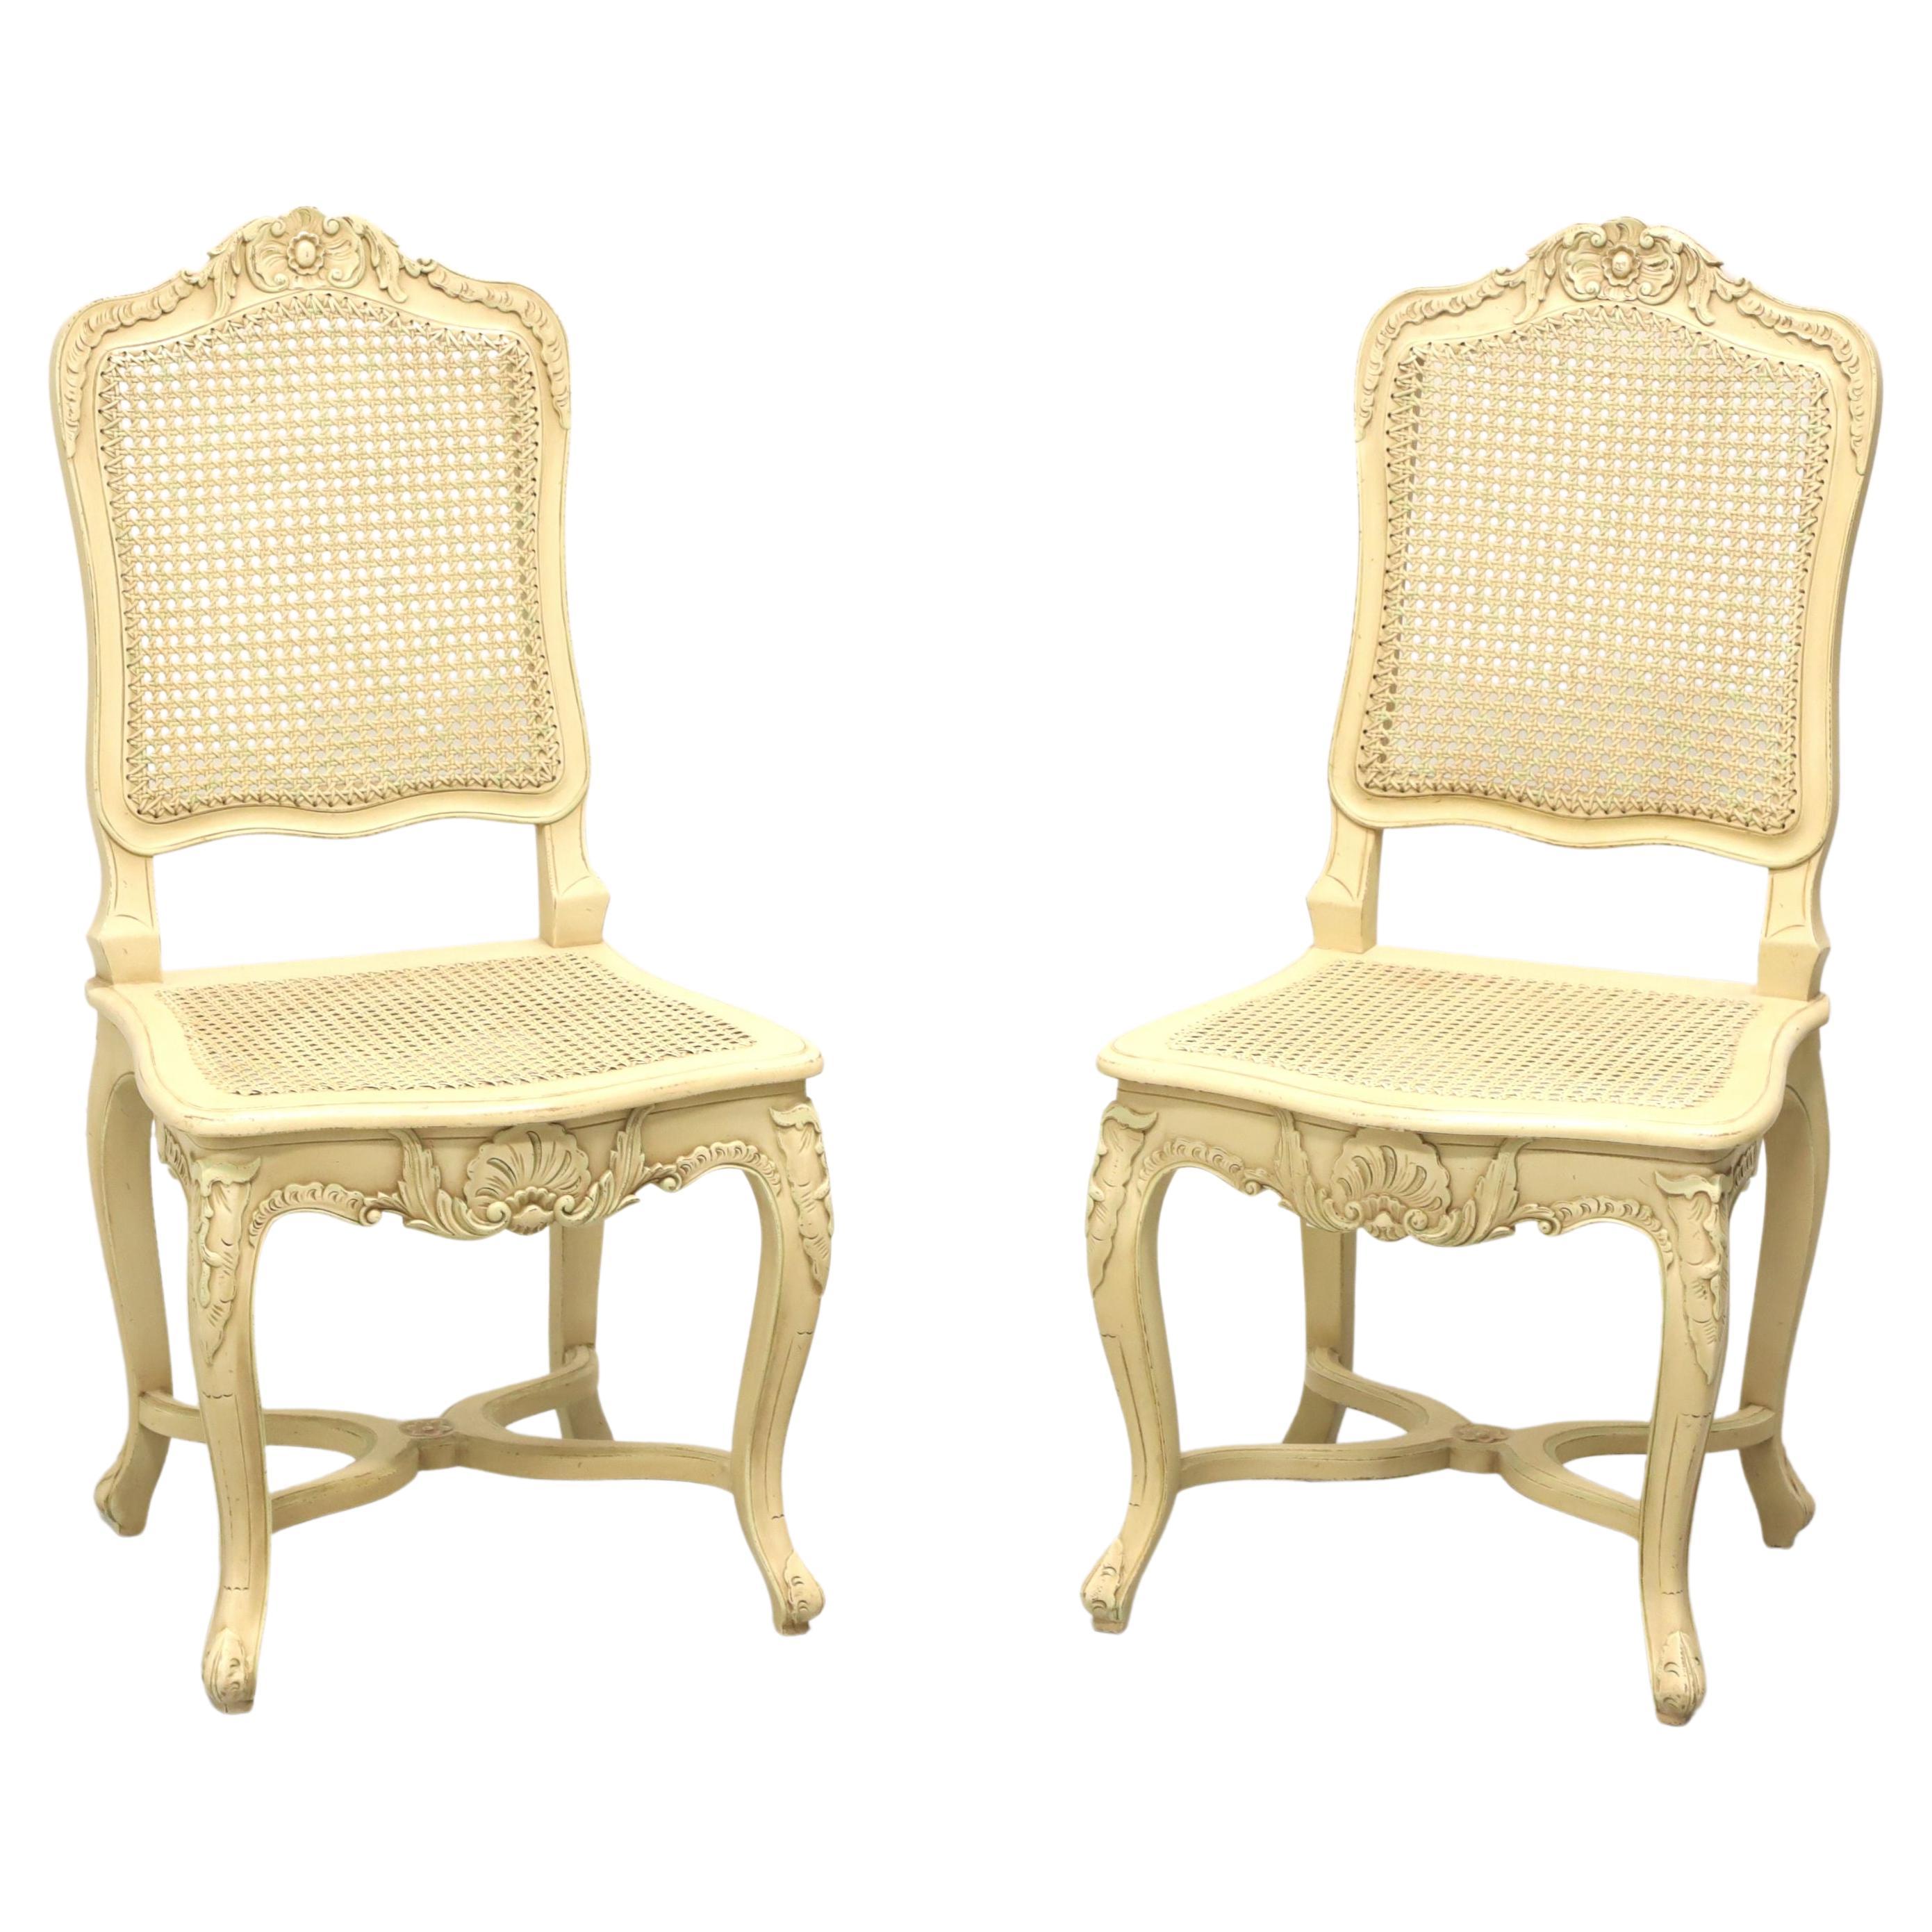 Vintage French Provincial Painted Caned Dining Side Chairs - Pair